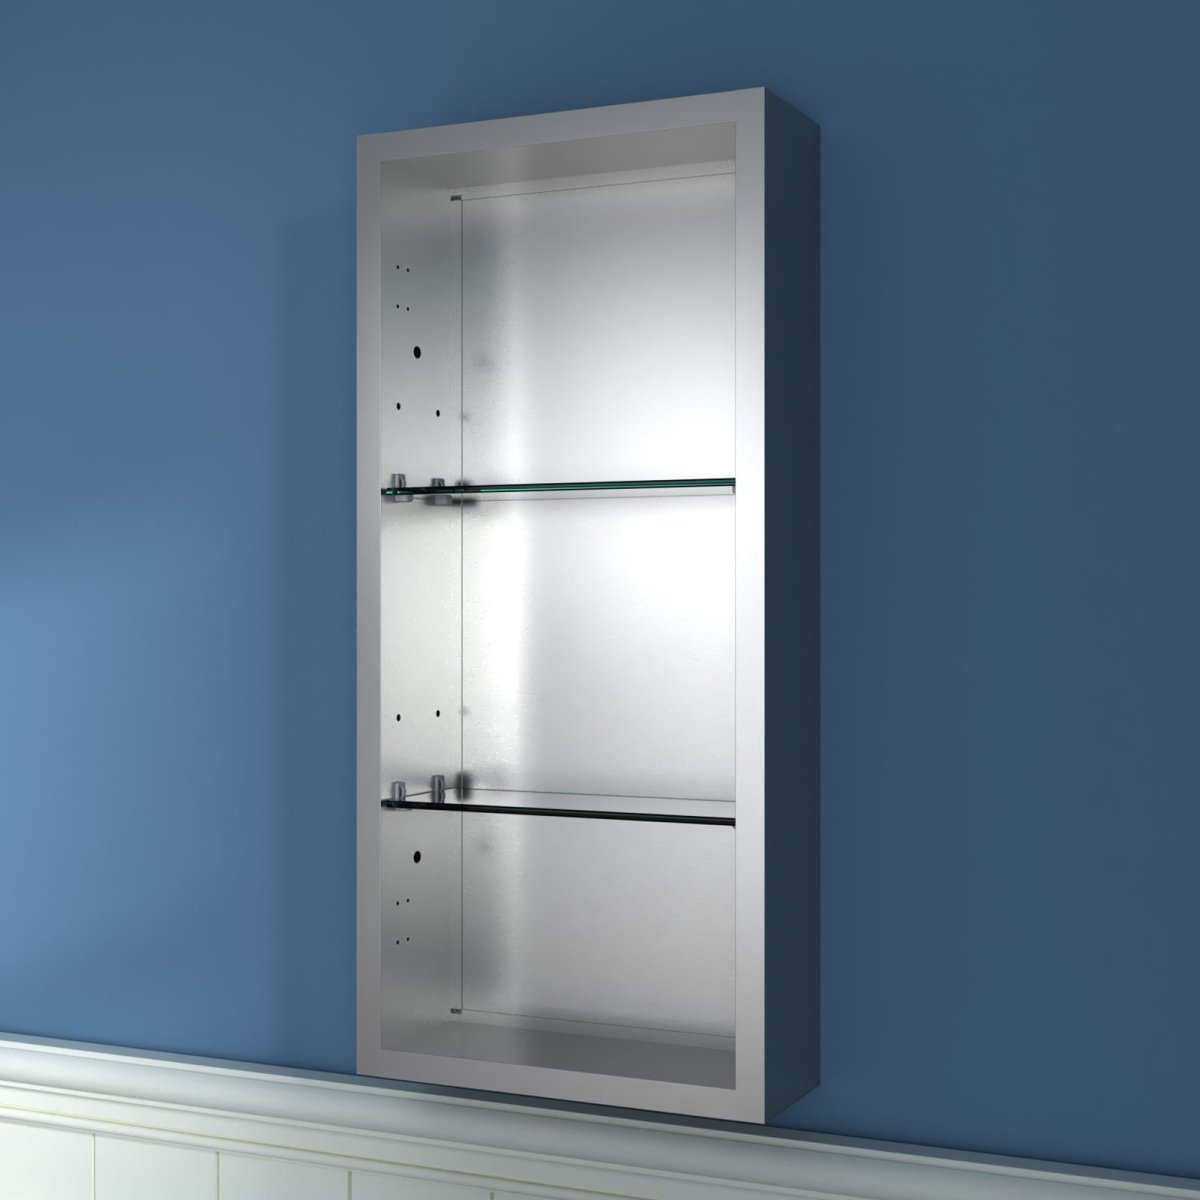 ExBrite 12 in. W X 26 in. H Single Medicine Cabinet without Light - ExBriteUSA